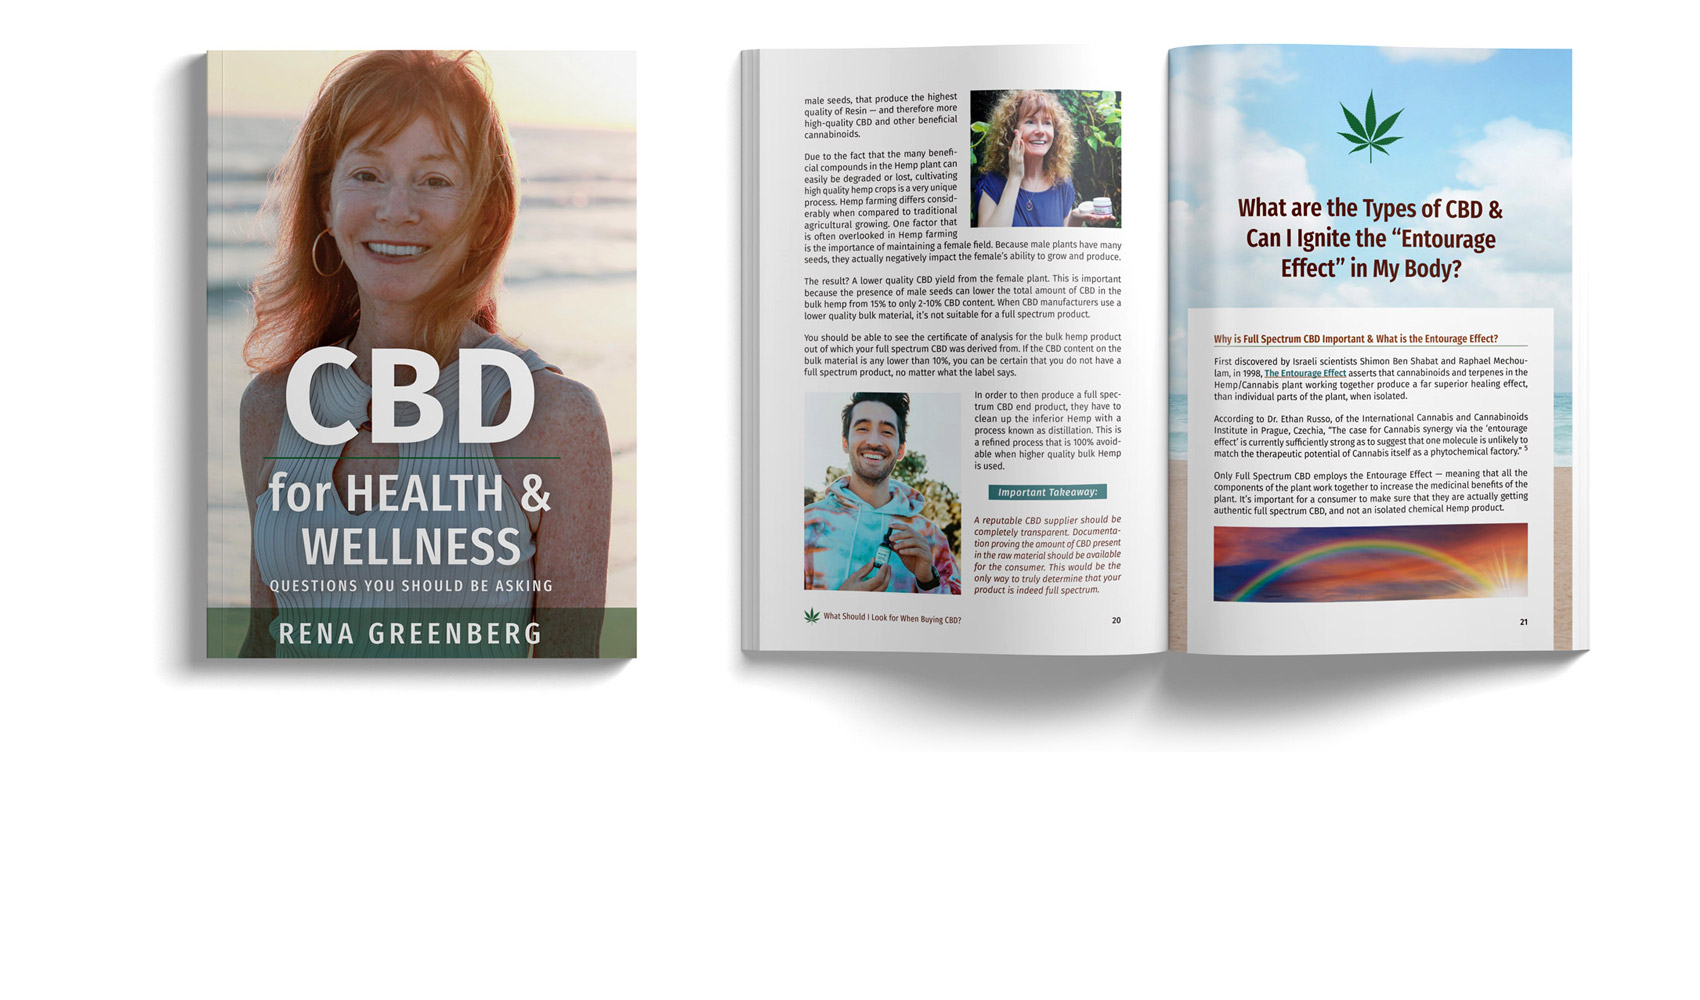 CBD for Health & Wellness by Rena Greenberg – Interior Layout by Latifah Shay